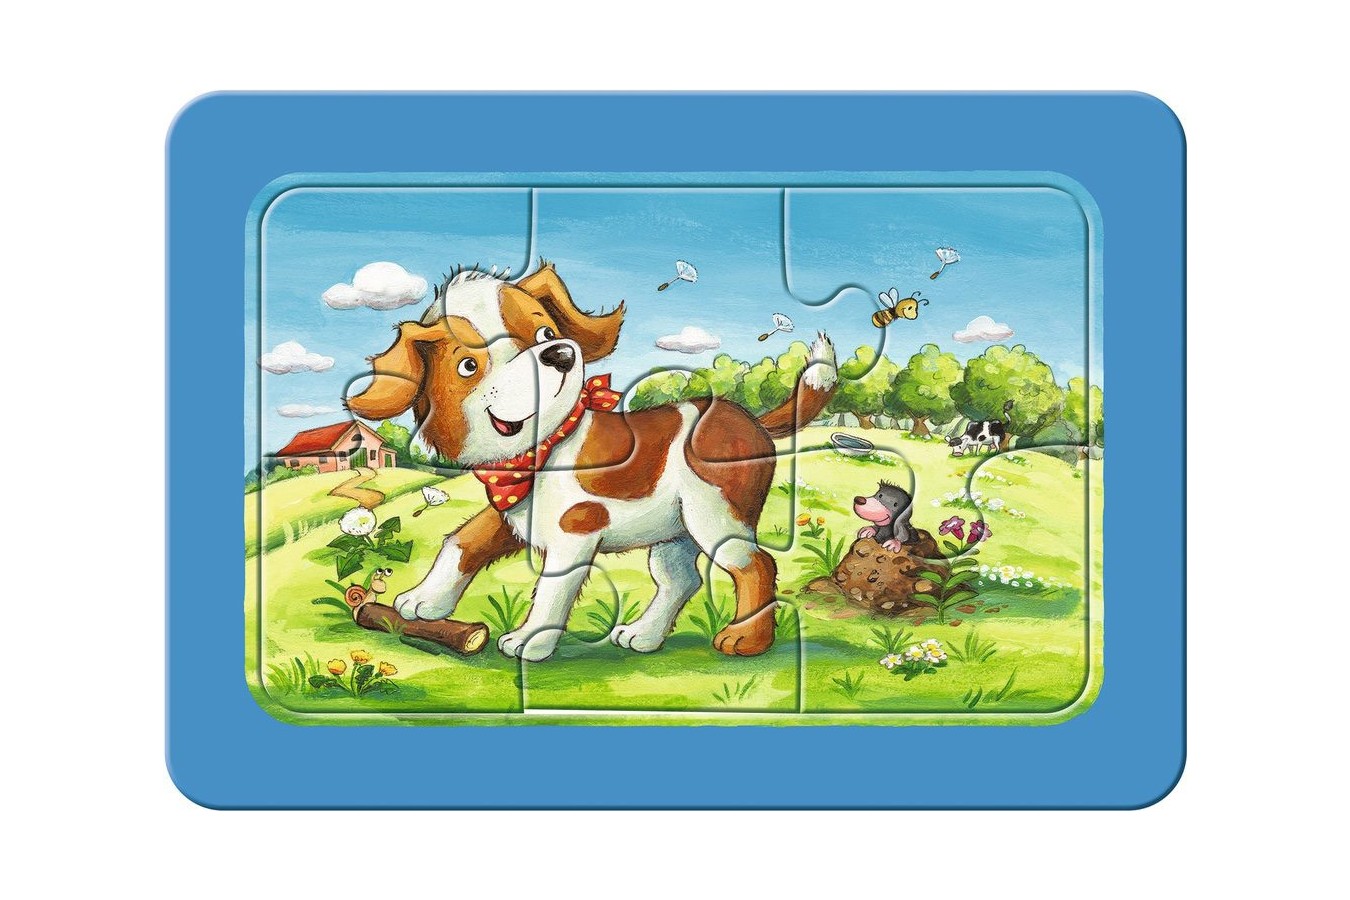 Puzzle Ravensburger - My First Puzzles, 5x2 piese (07062)